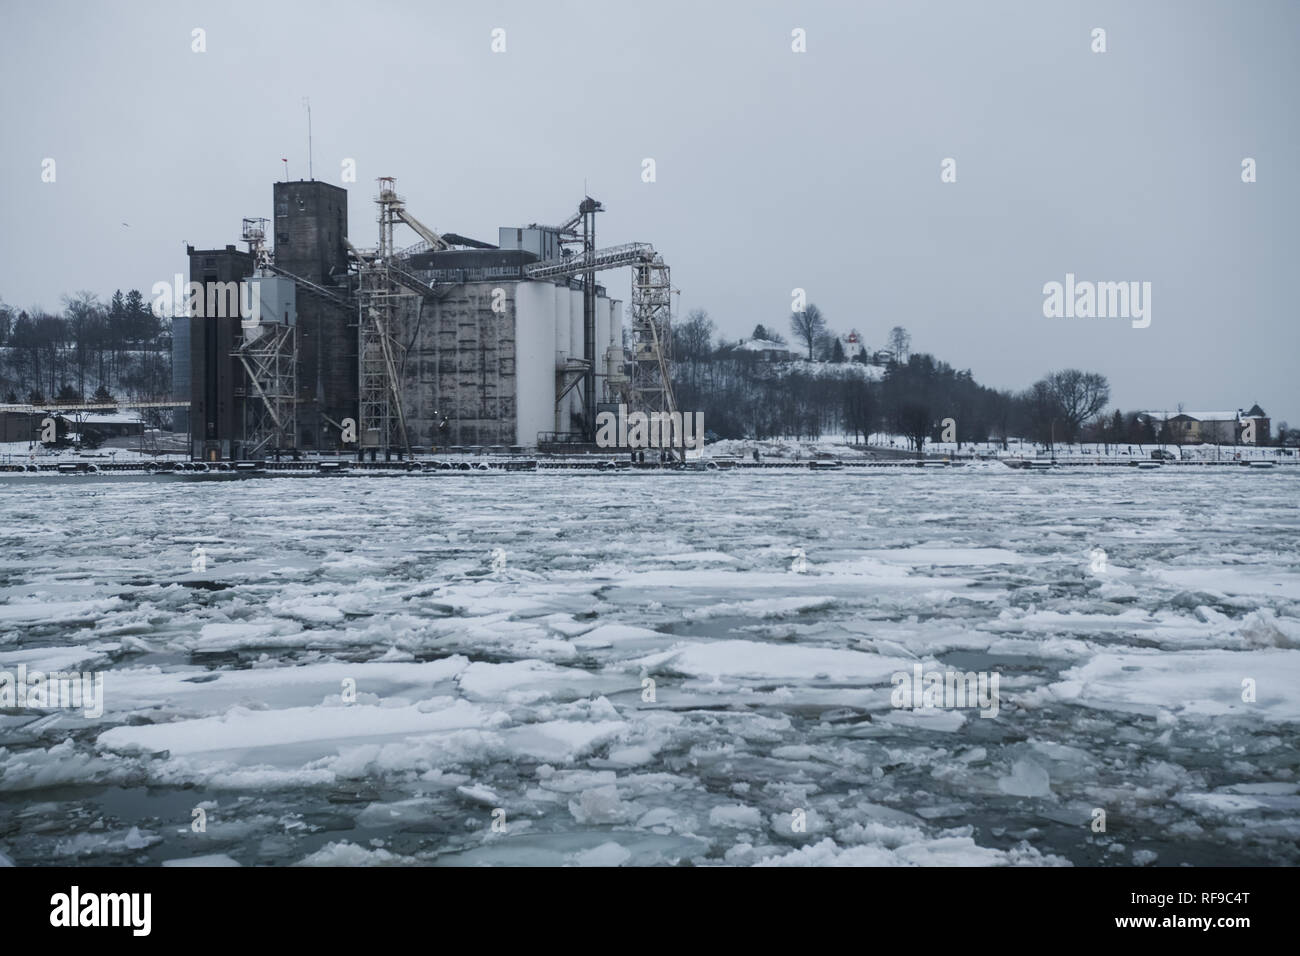 An image of Goderich harbor in winter. Stock Photo